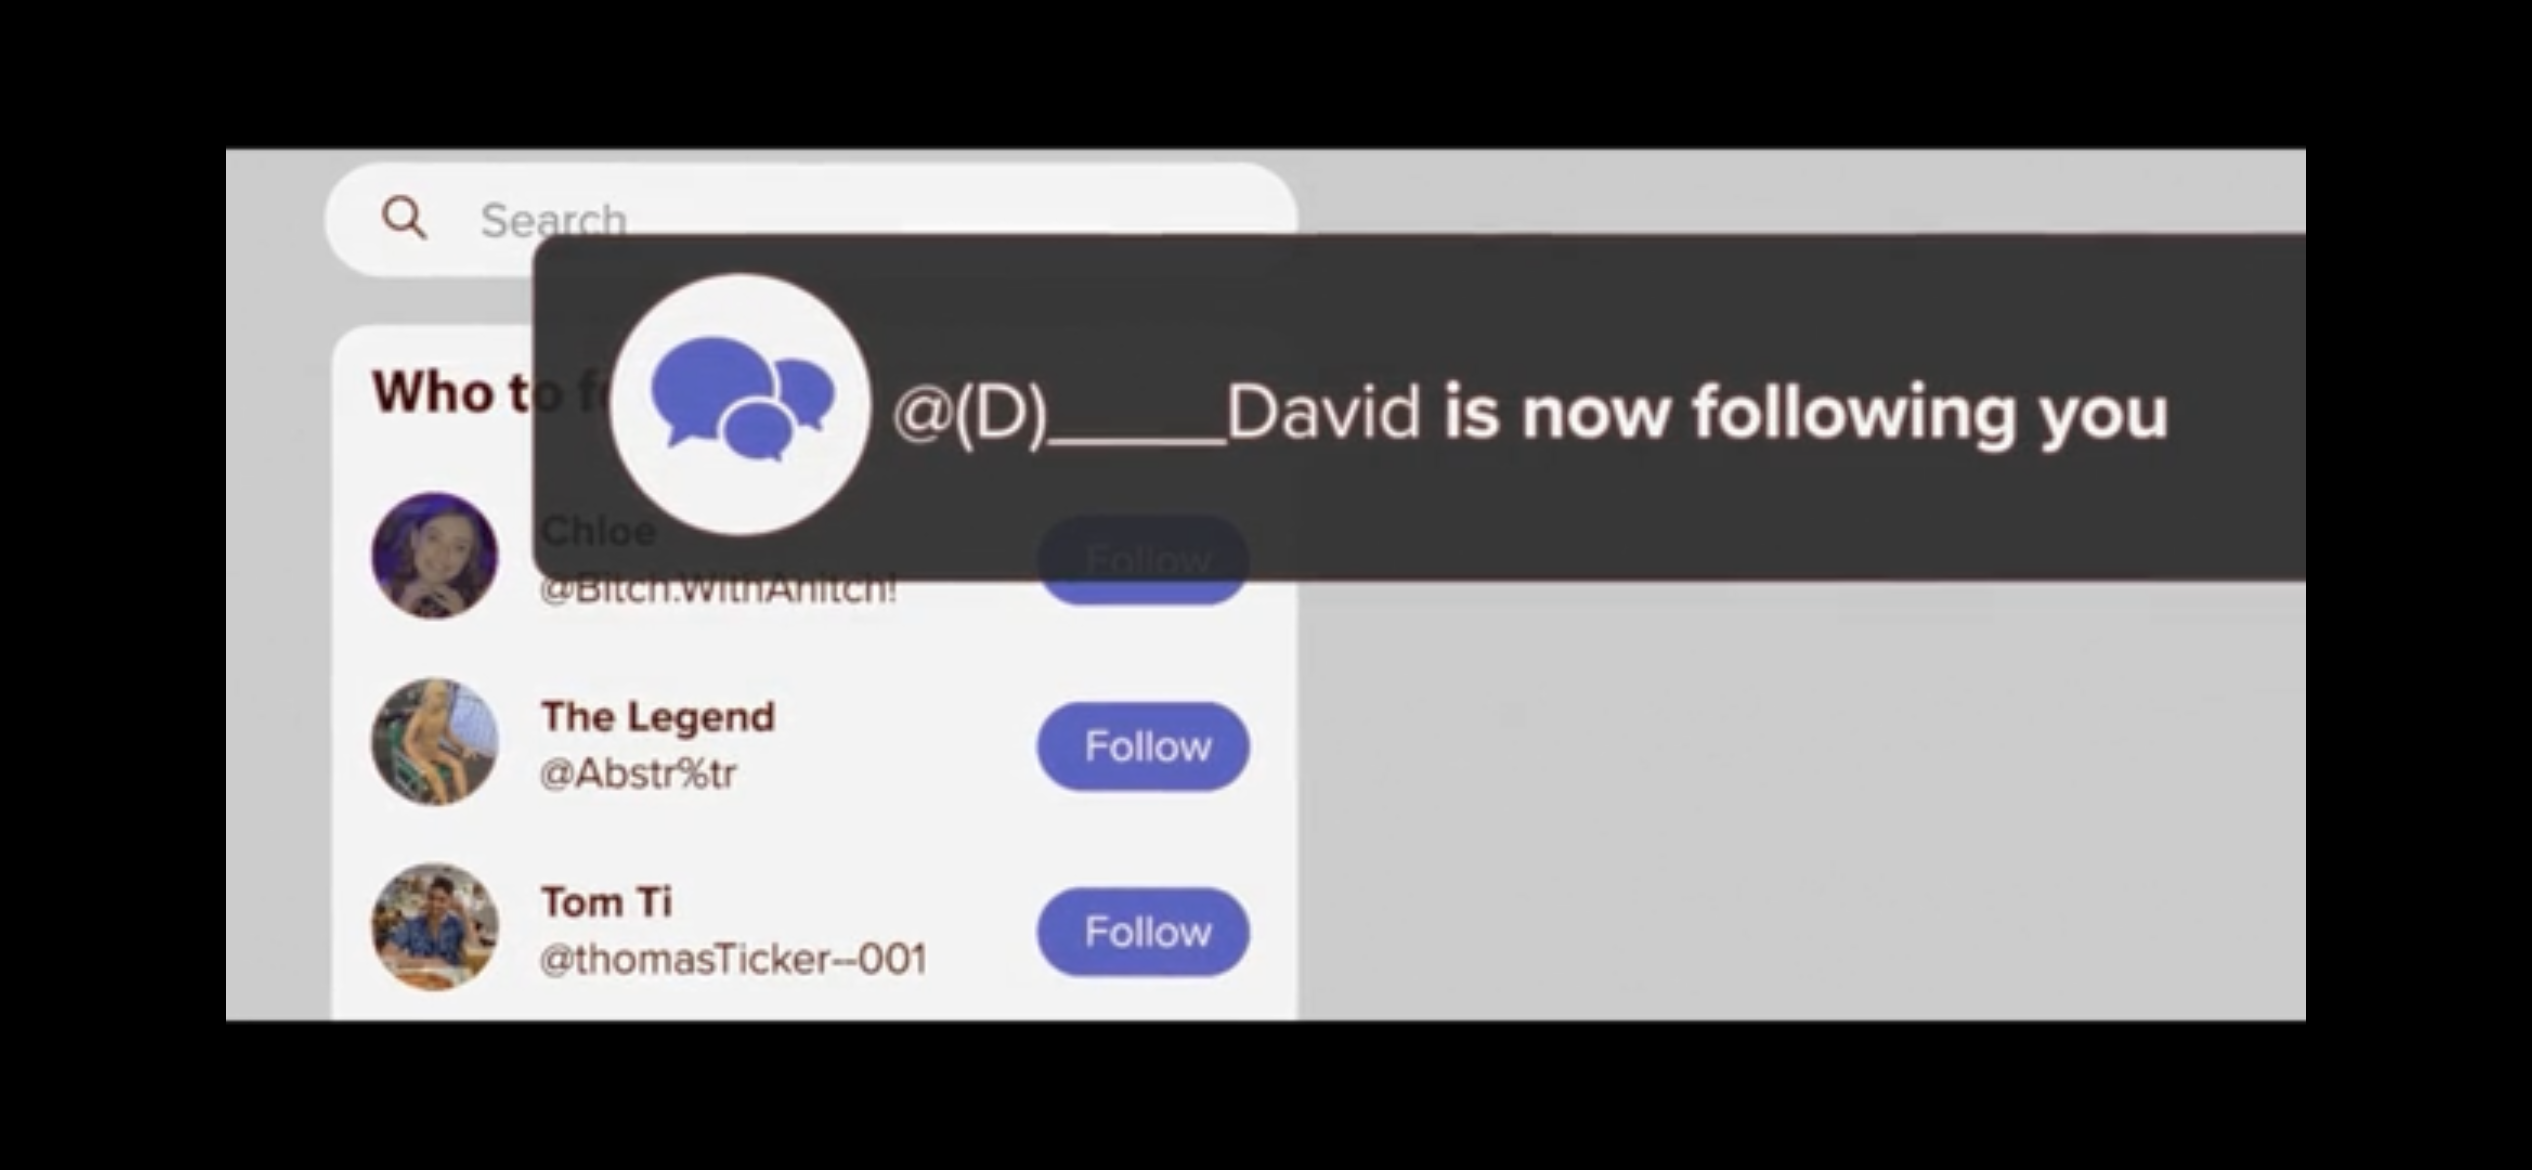 Notification: &quot;@(D)__david is now following you&quot;